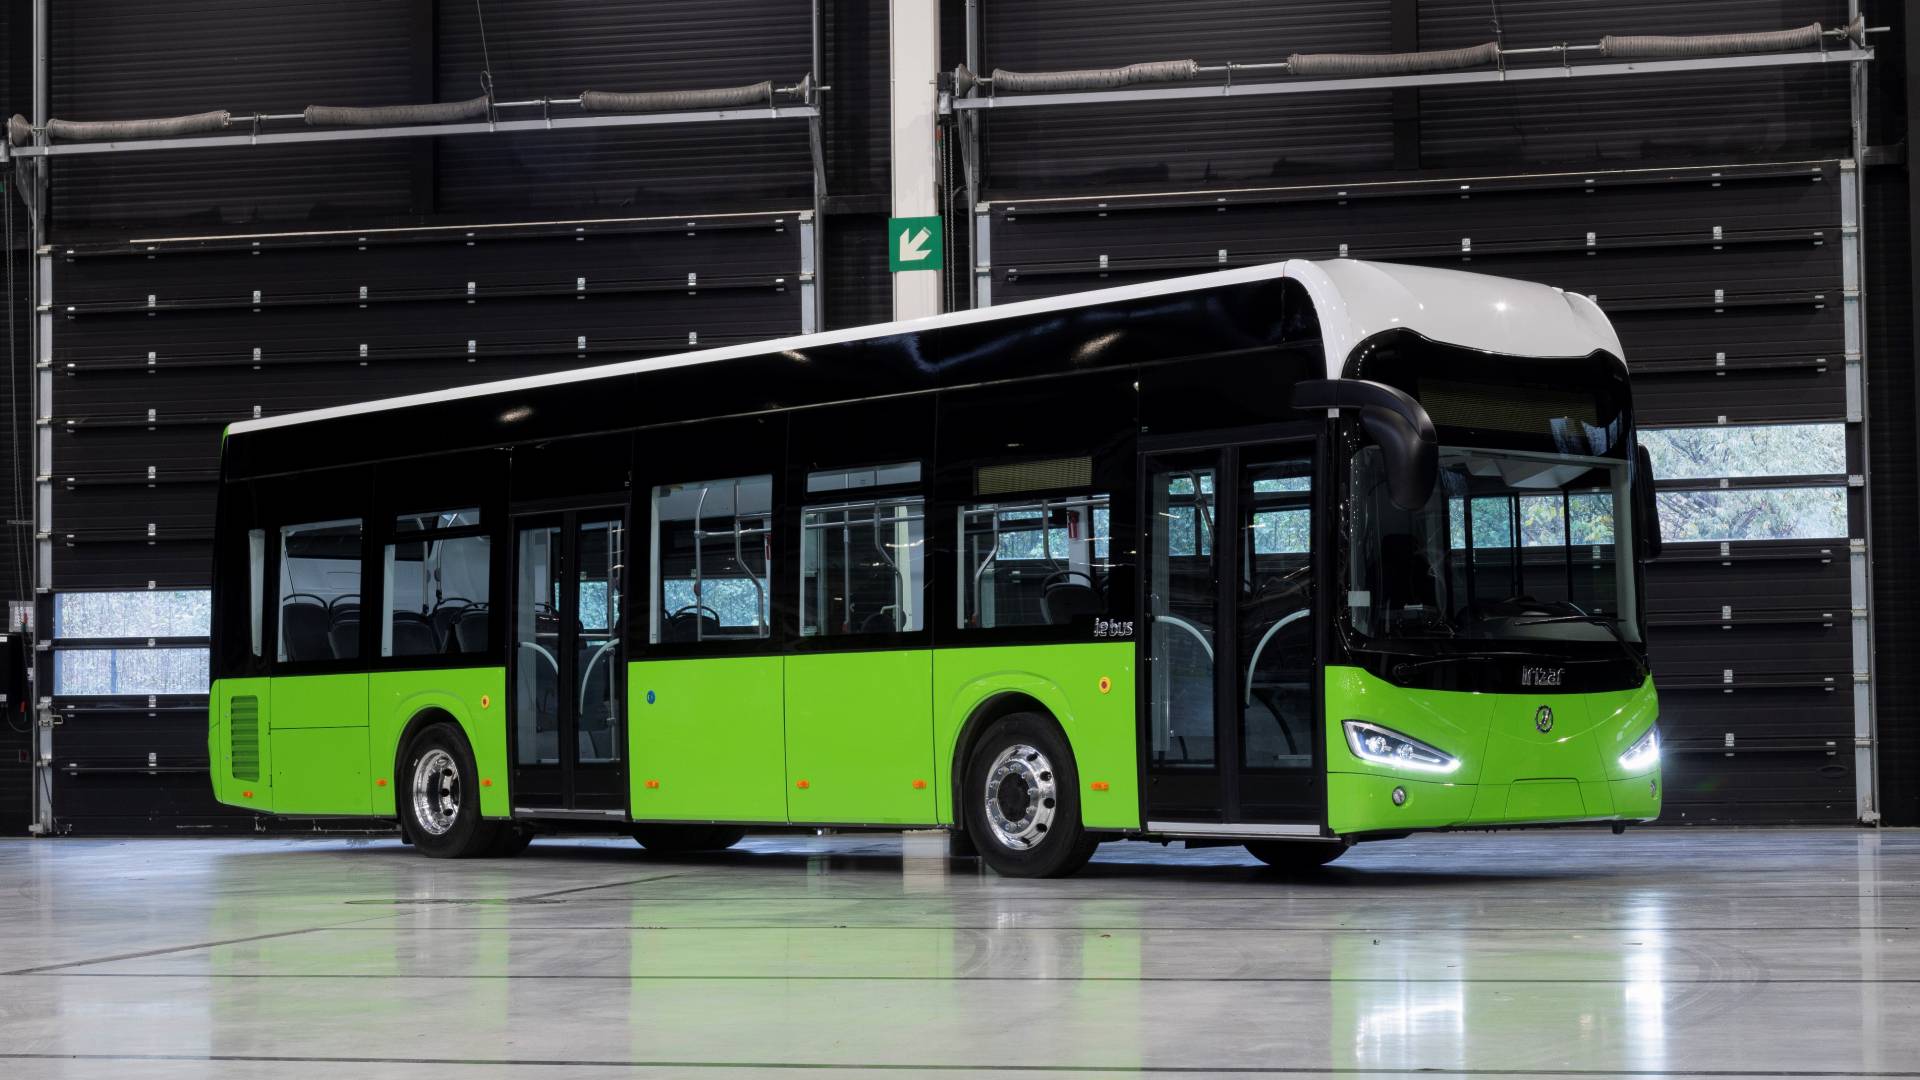 The Irizar Group continues expanding in Portugal and will supply 43 buses and coaches to the city of Guimarães 